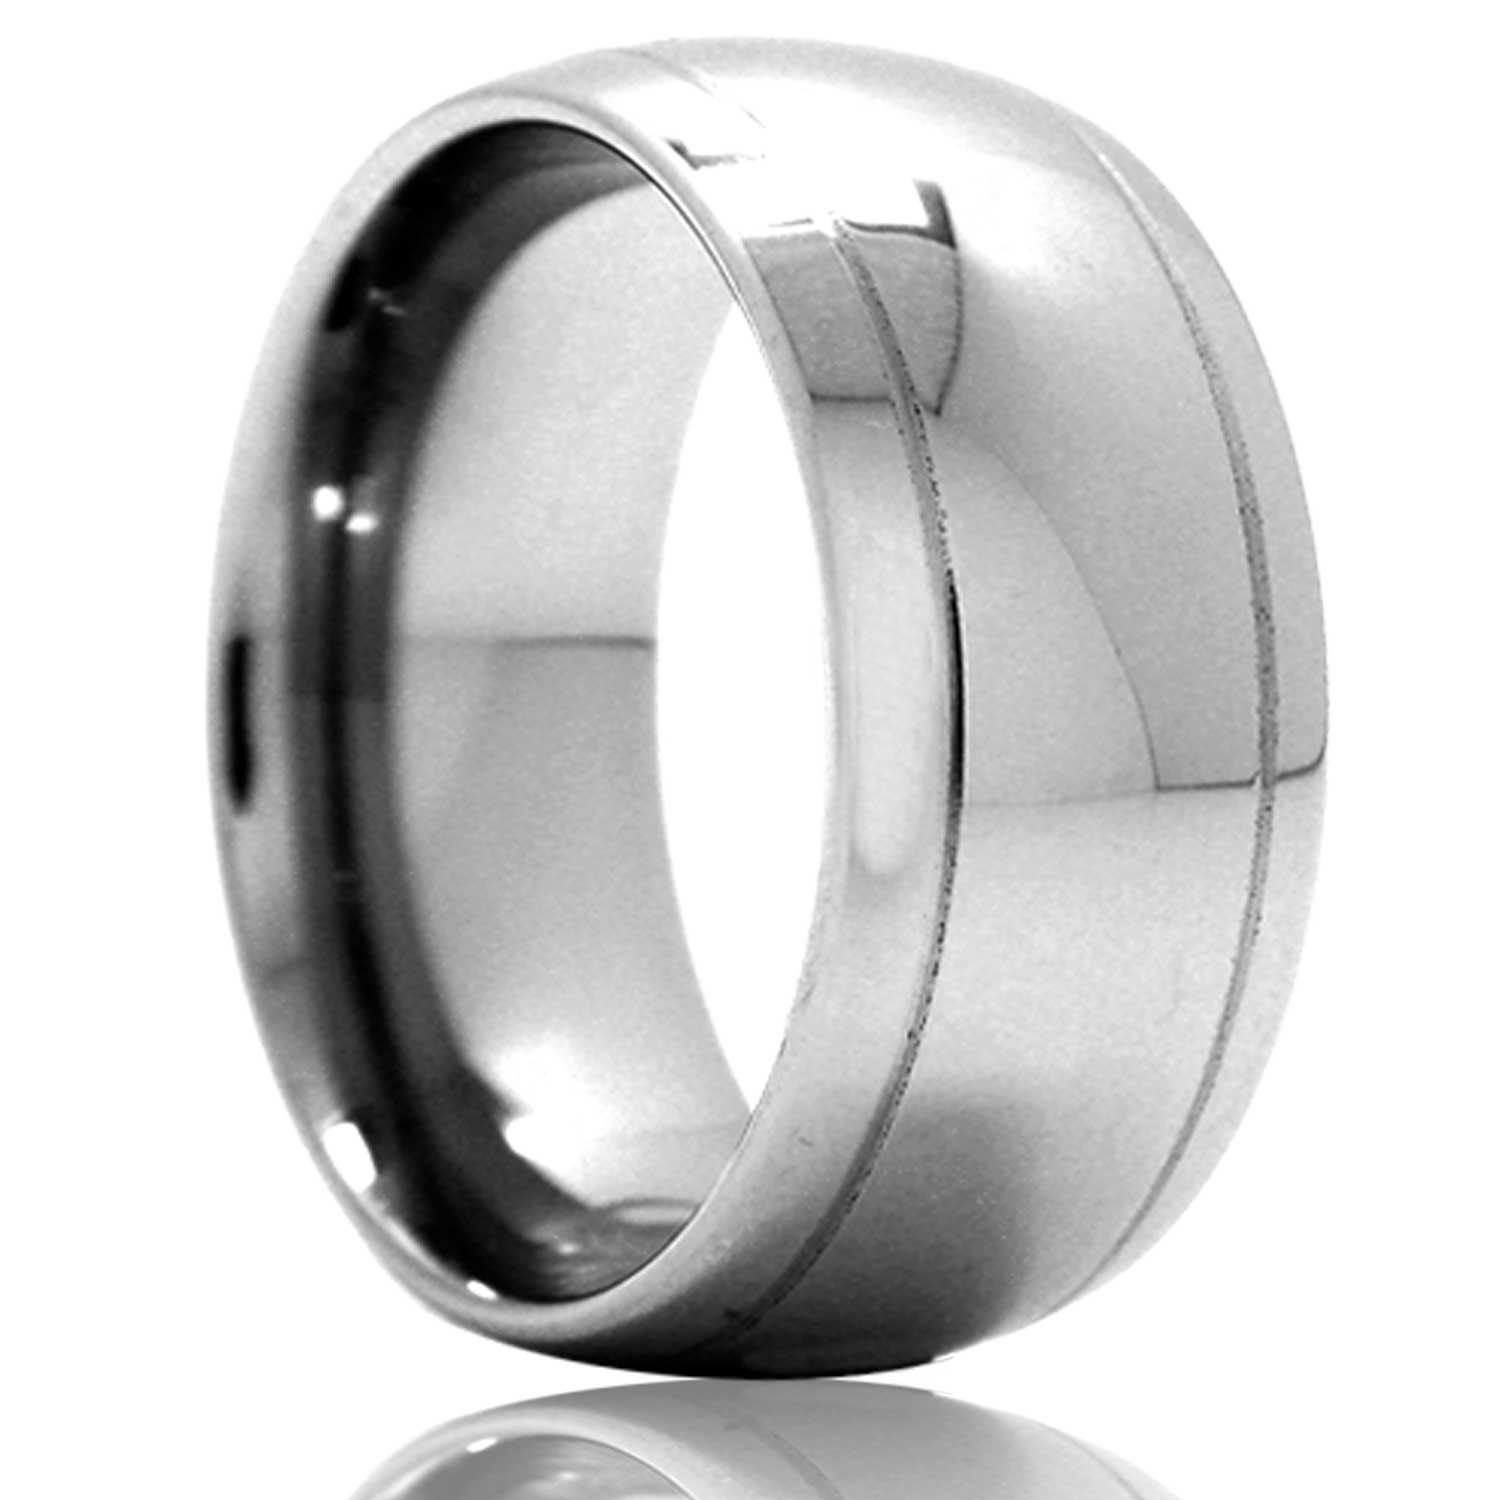 A domed tungsten wedding band with grooved edges displayed on a neutral white background.